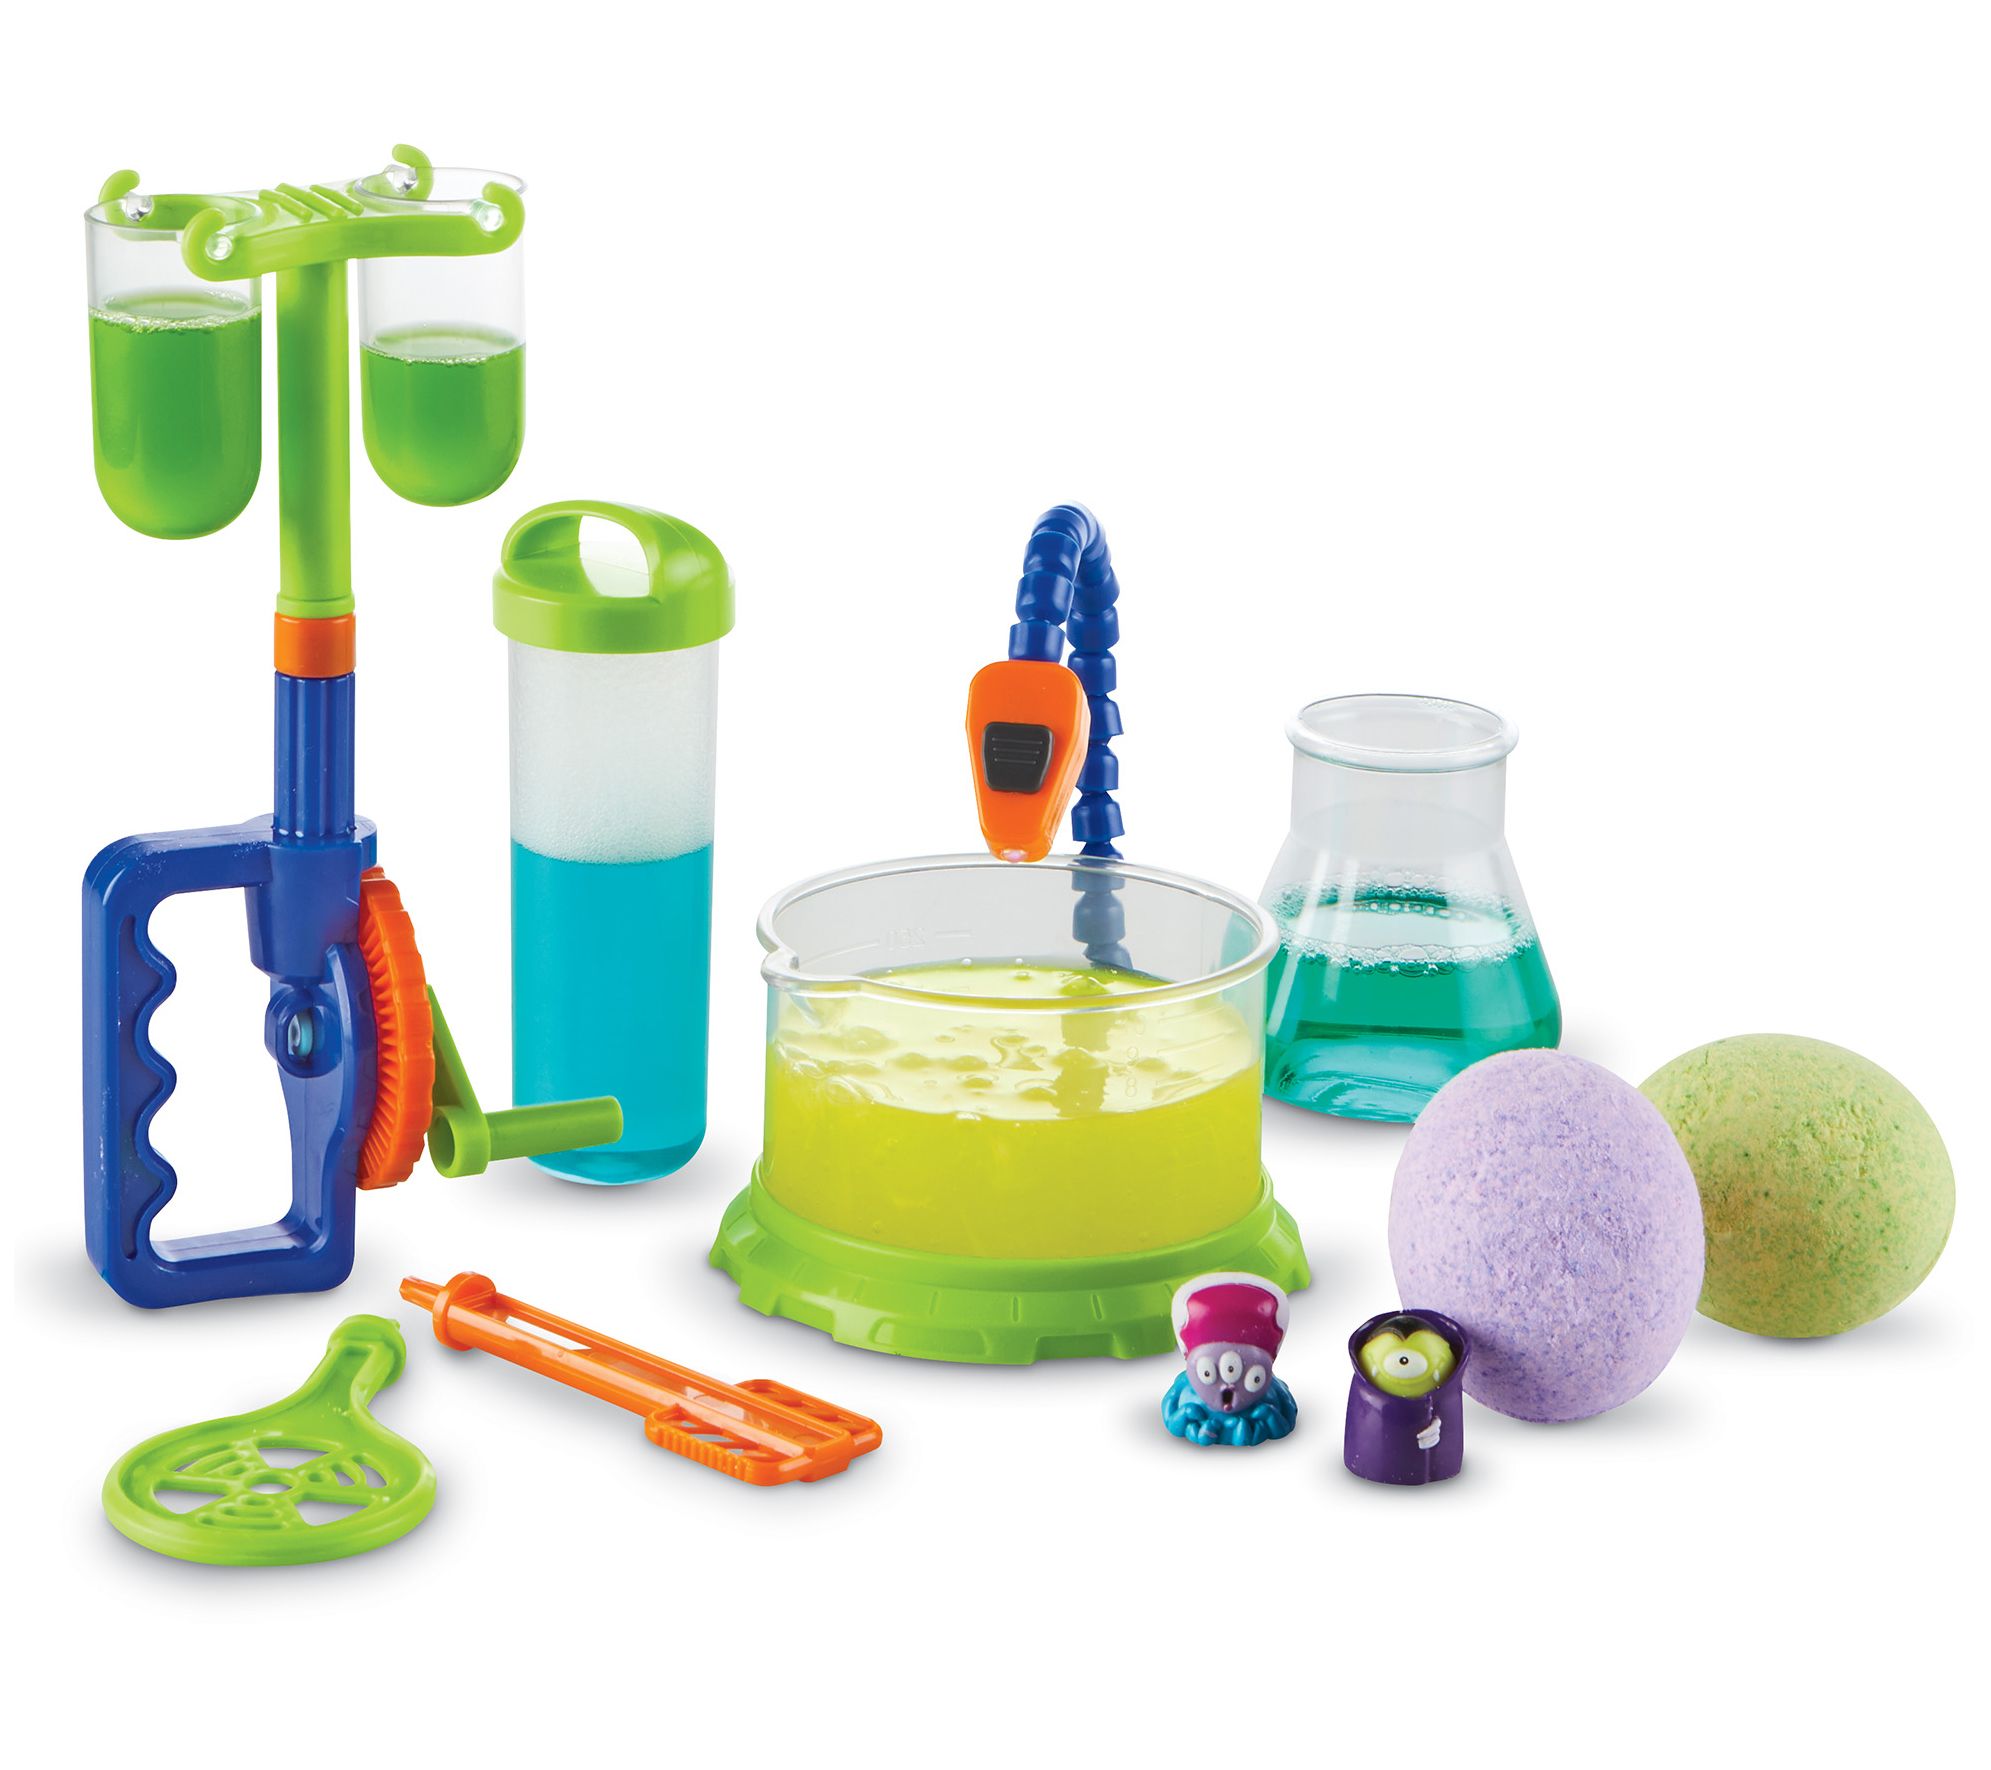 Piccolo Genio Super Easy Chemistry Experiments Educational Toy for sale online 